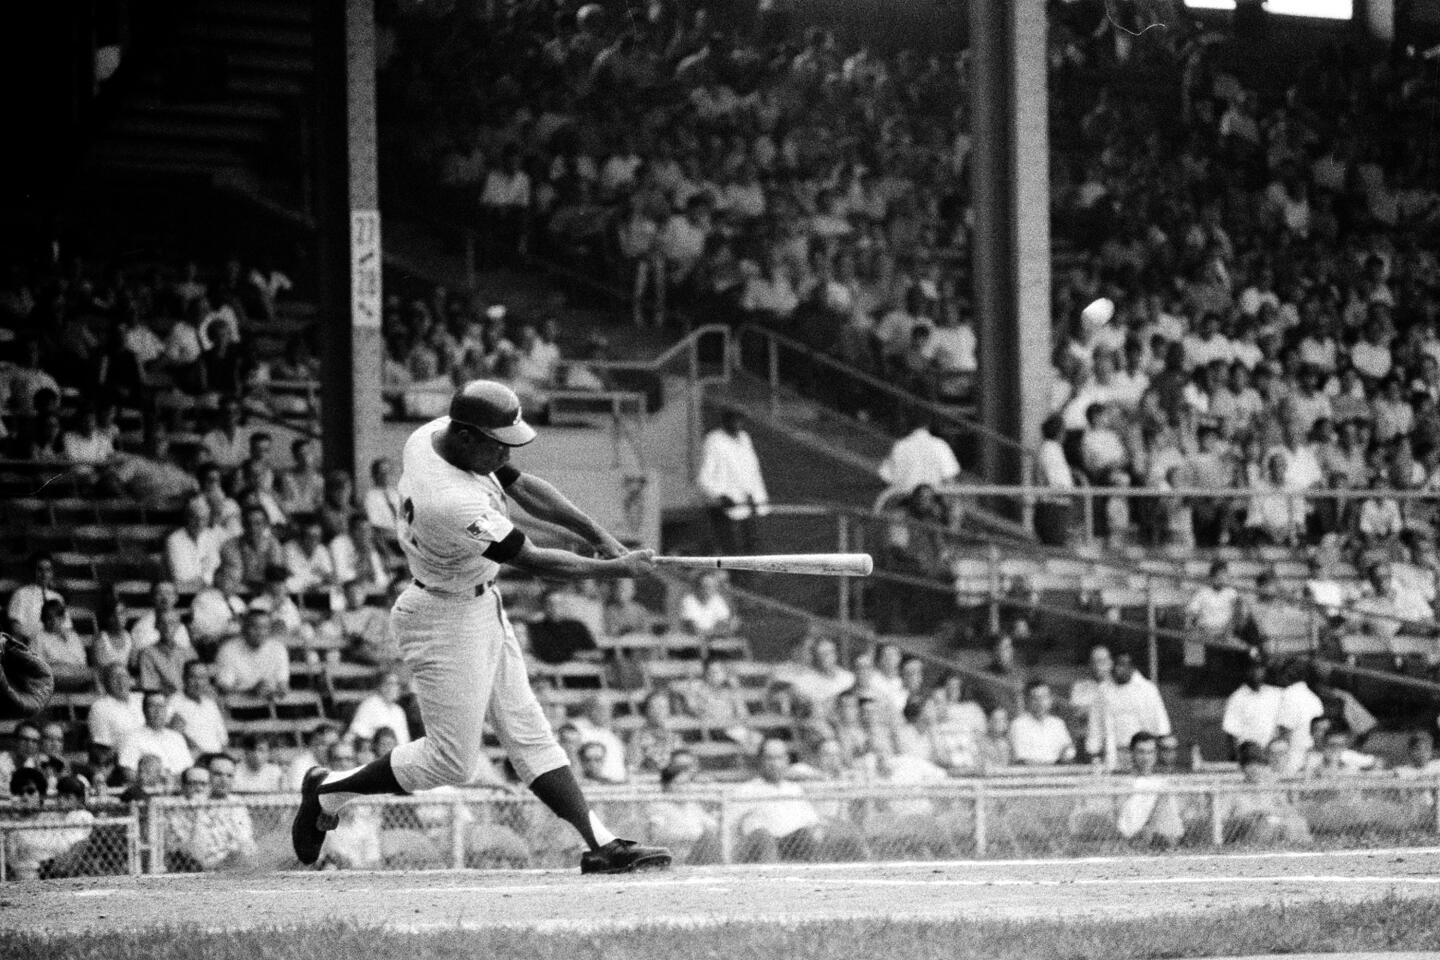 Remembering the Day Hank Aaron Broke Babe Ruth's Home Run Record